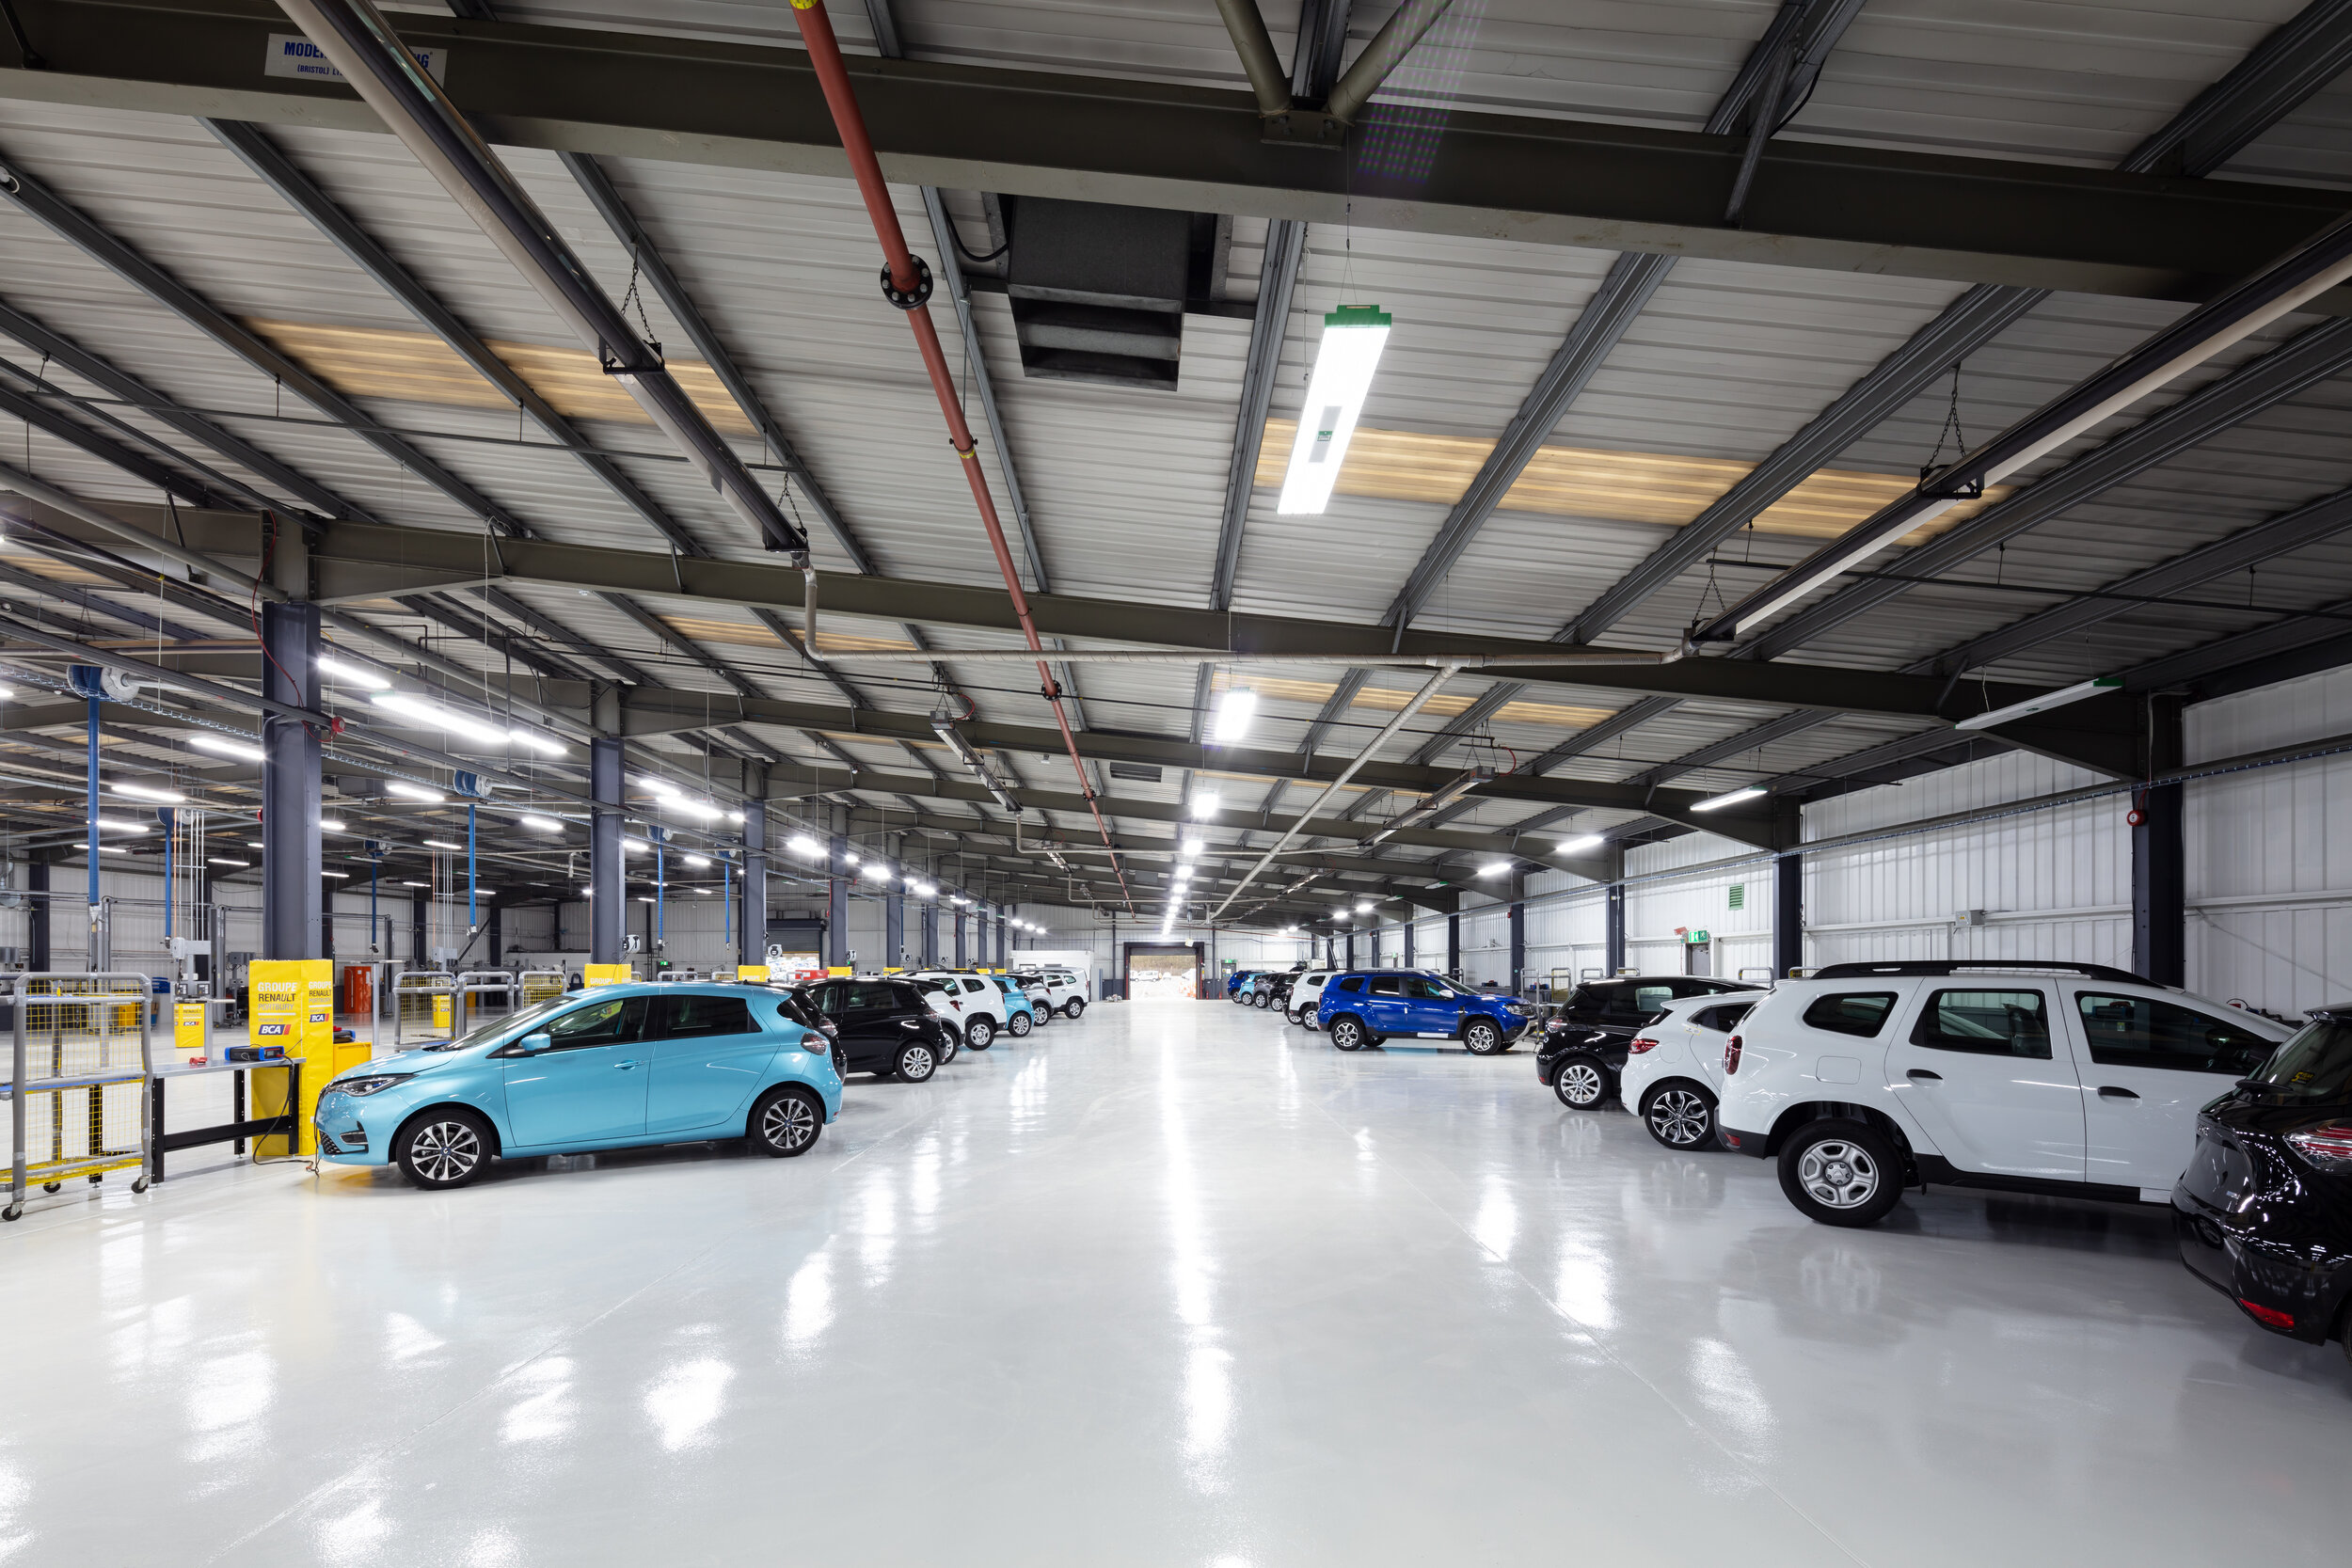  BAC Vehicle Services have recently opened their newly refurbished Renault Import Centre in Portbury. The new facility was designed by Hadfield Cawkwell Davidson with the refurbishment works done by Wordsworth Construction Services. Client: BCA Vehic